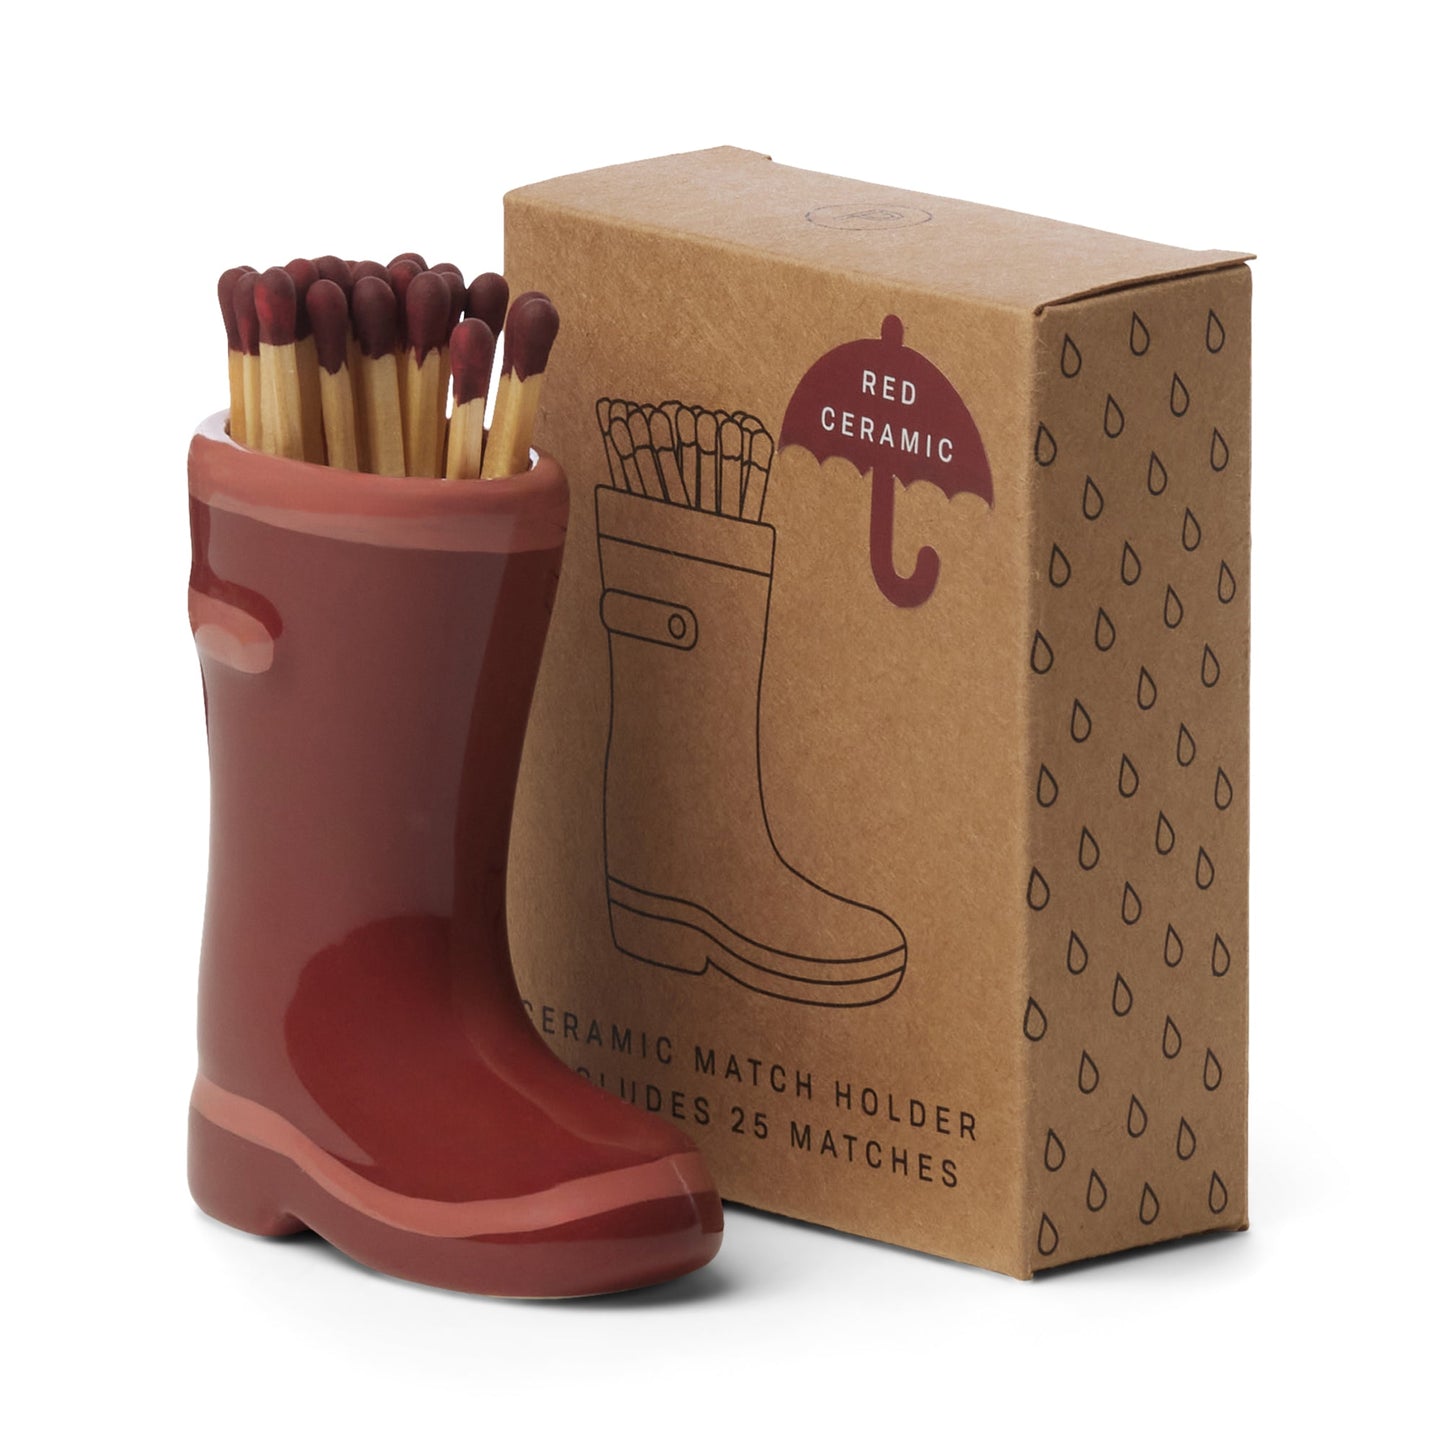 Wellington Boot Matches Holder with 25 Matches Dark & Light Red